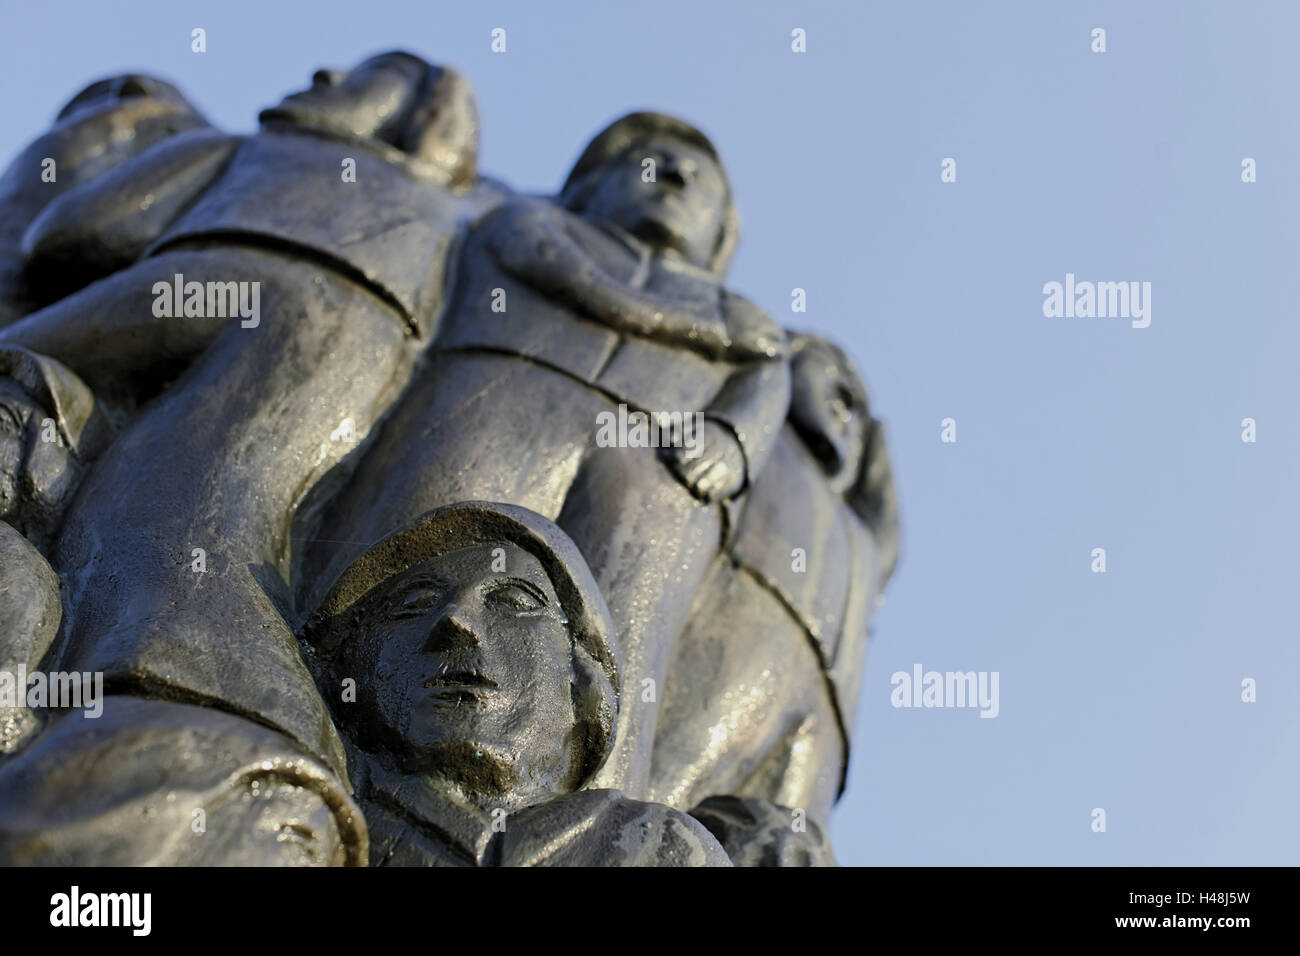 Monument in the mountain Elb with dewdrop, Altona, Hanseatic town Hamburg, Germany, Stock Photo